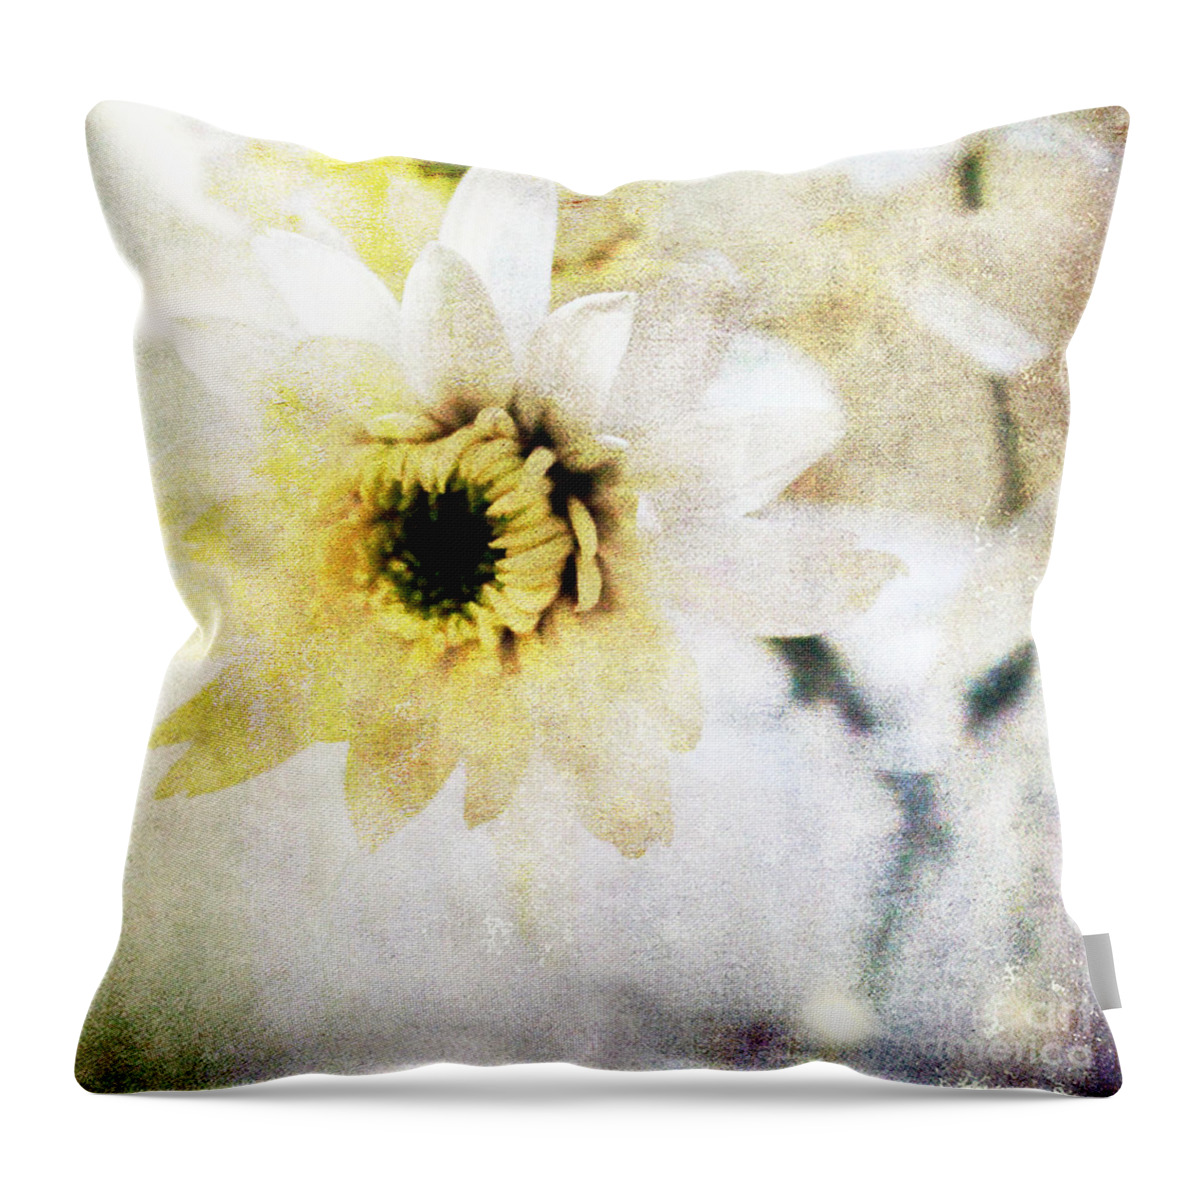 Flower Throw Pillow featuring the mixed media White Flower by Linda Woods